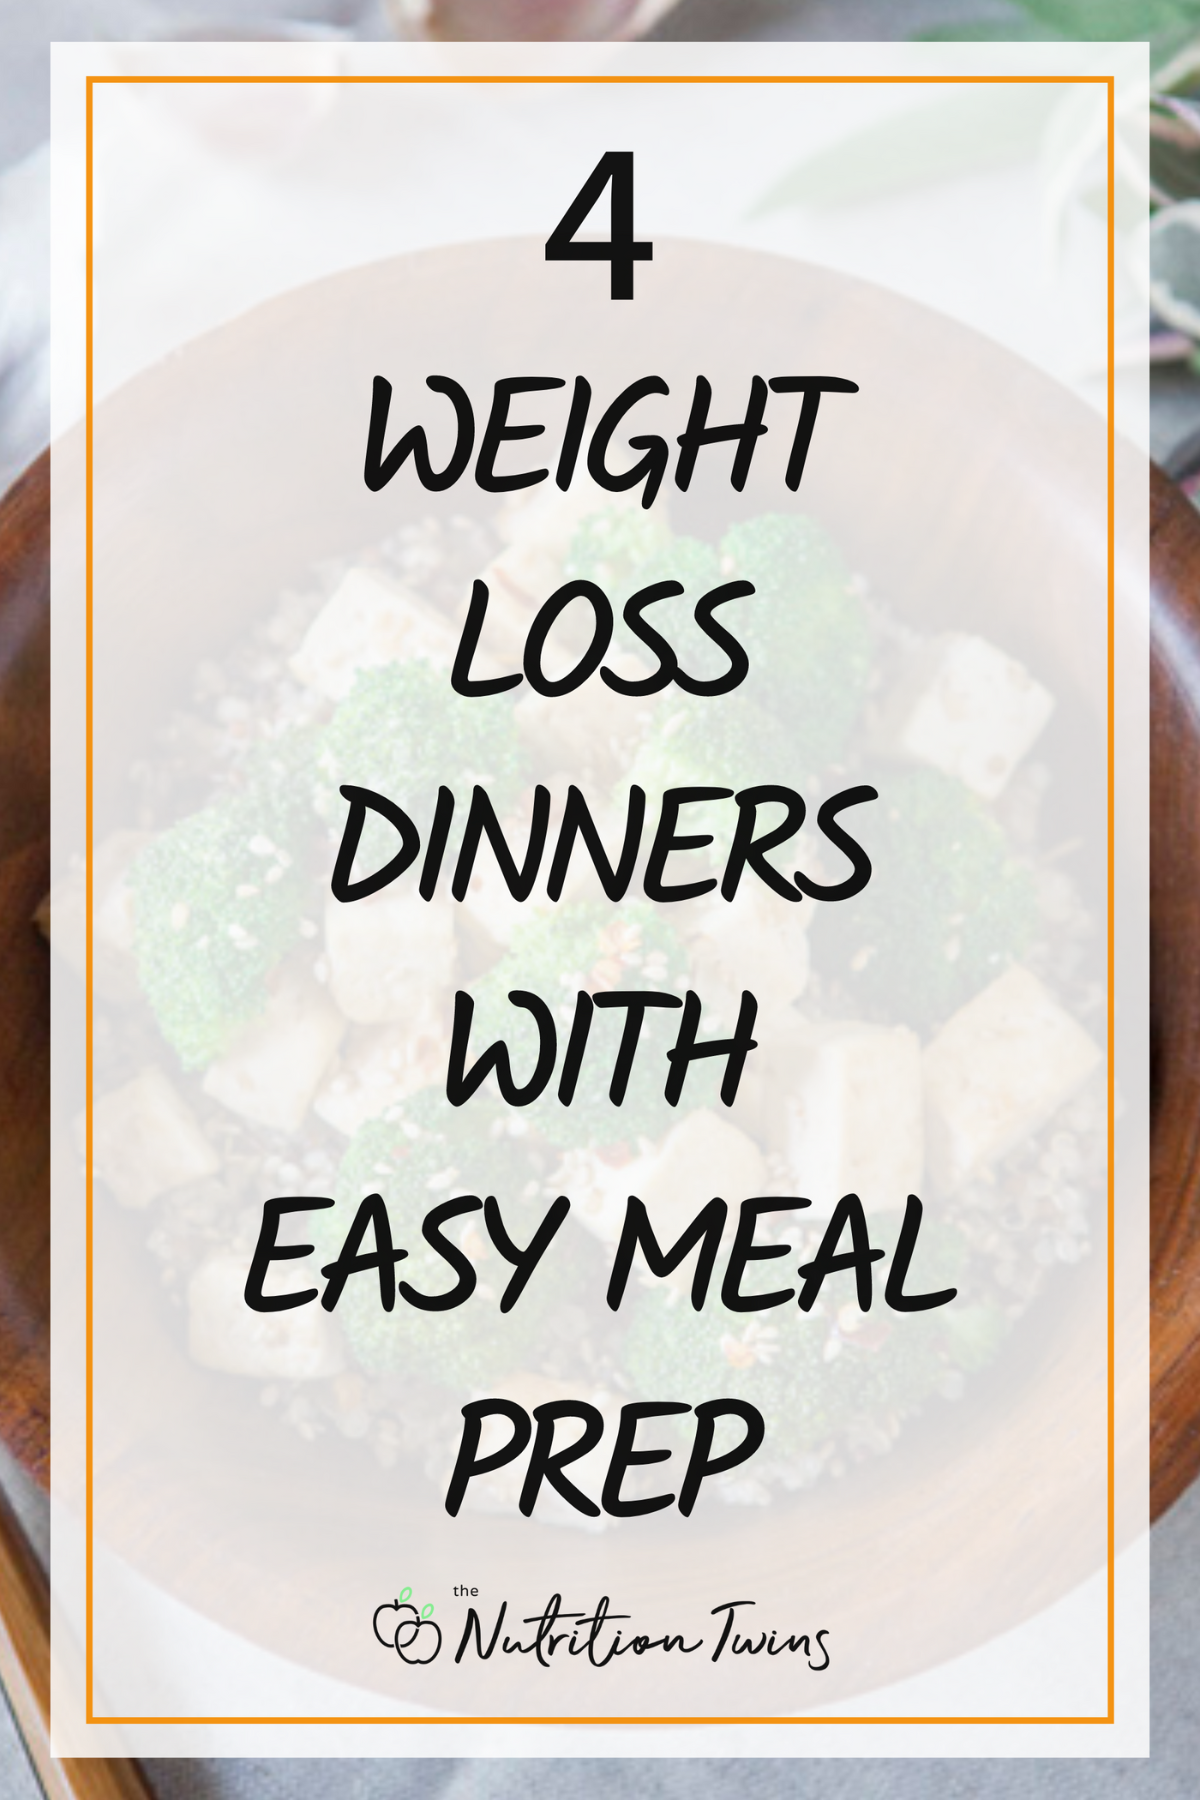 4 Weight Loss Dinner Recipes with Easy Meal Prep with broccoli and tofu stir fry in background